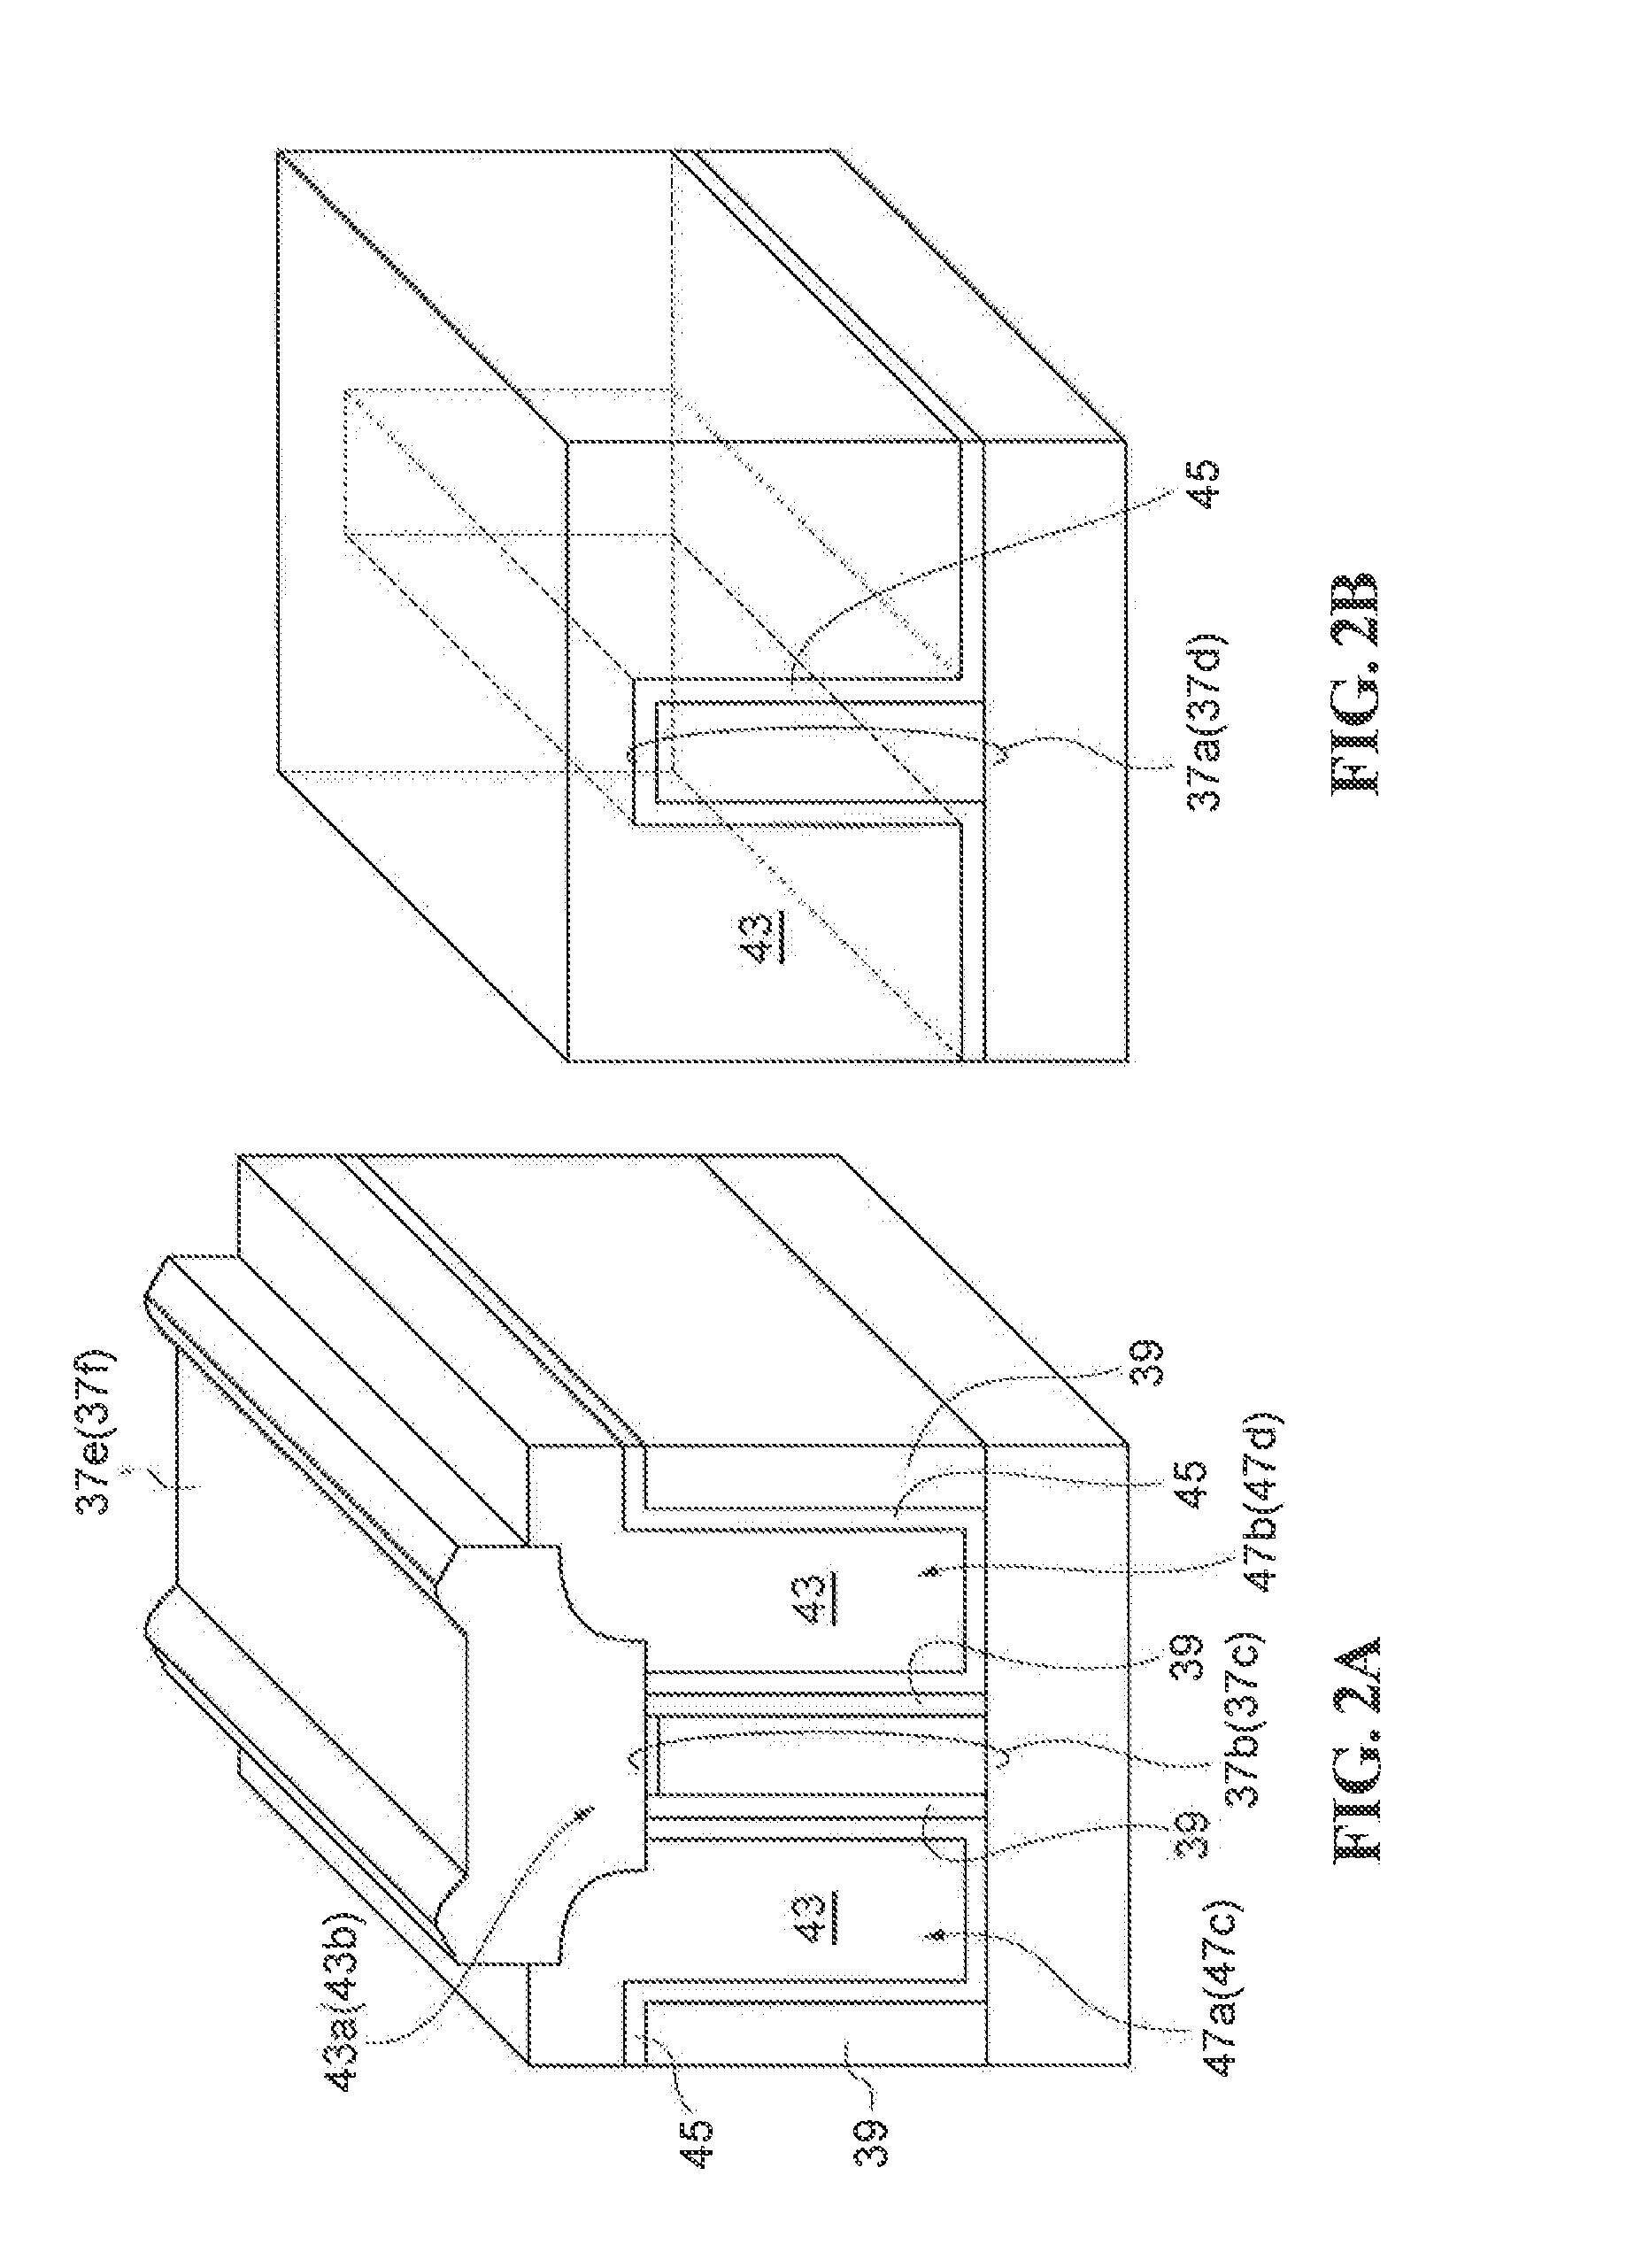 Semiconductor optical integrated device